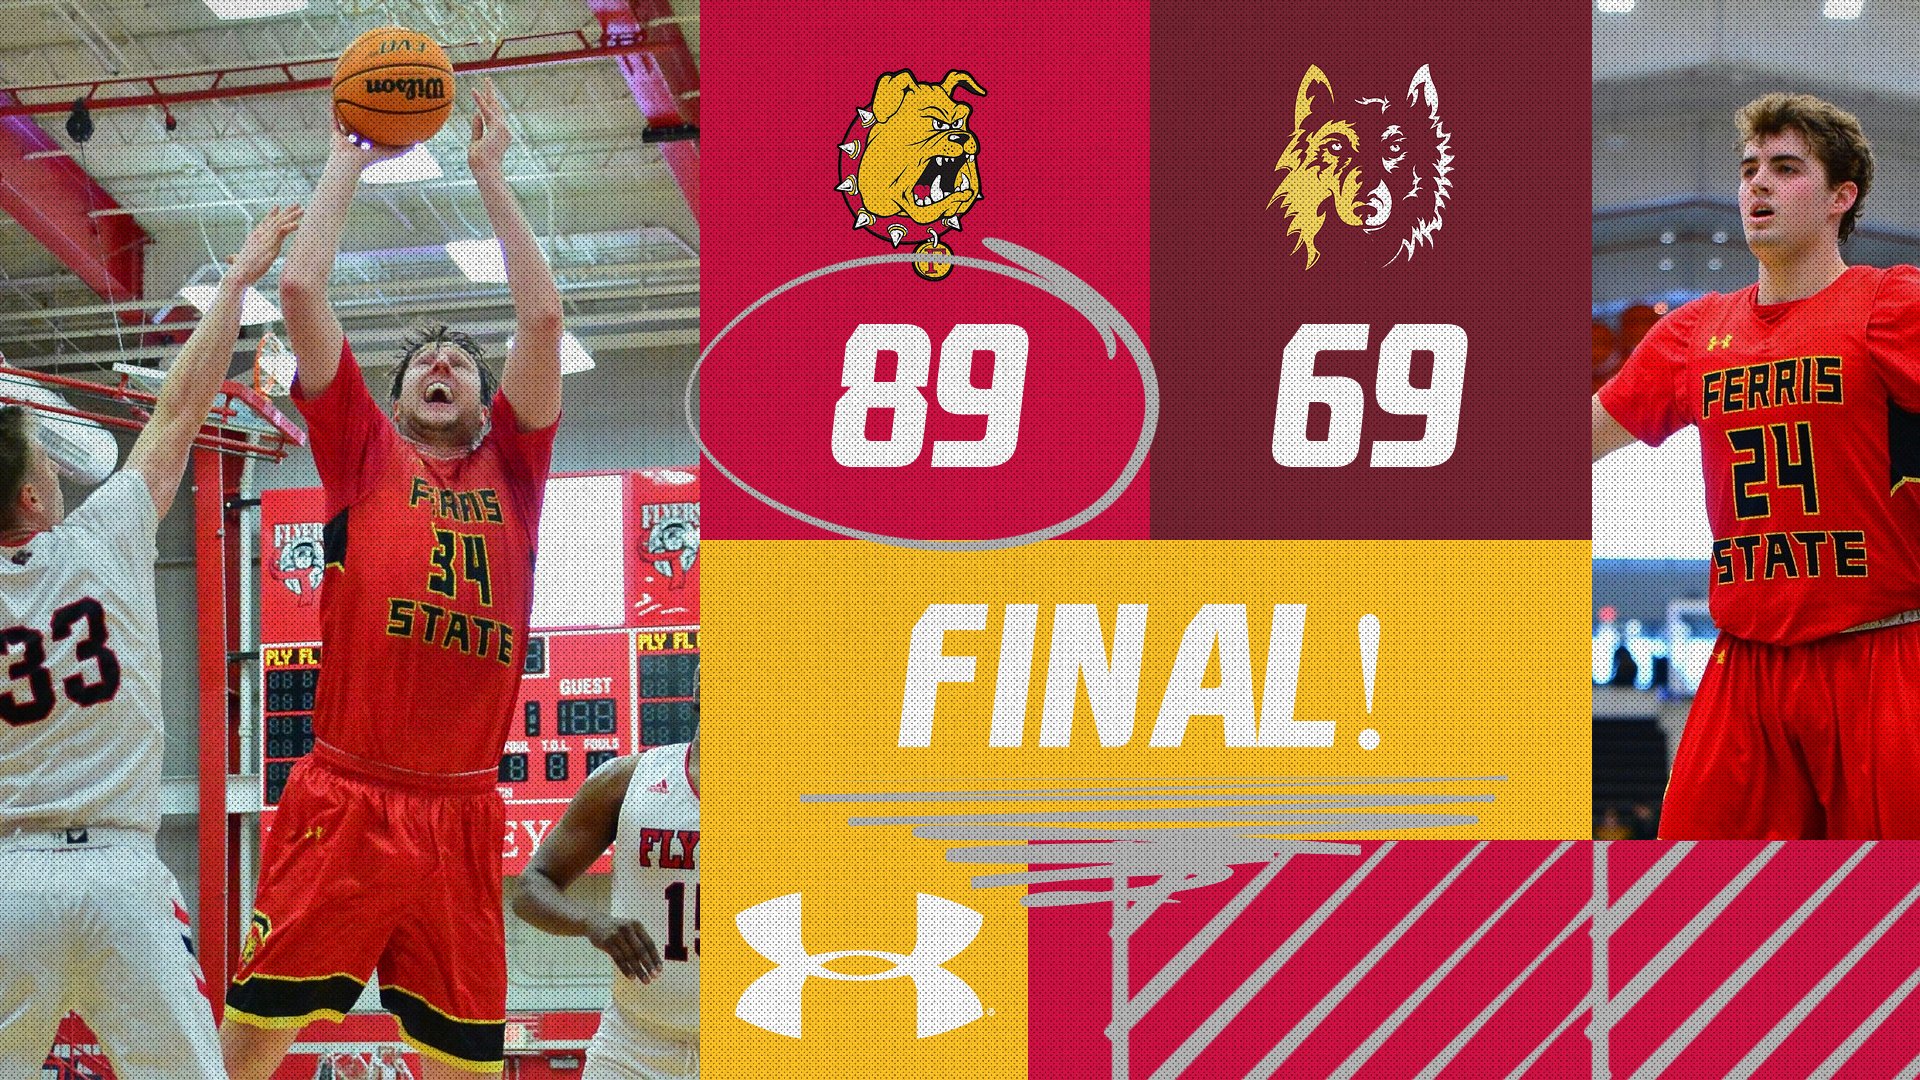 Ferris State Dominates Northern State At Champions Classic To Pick Up First Regular-Season Victory